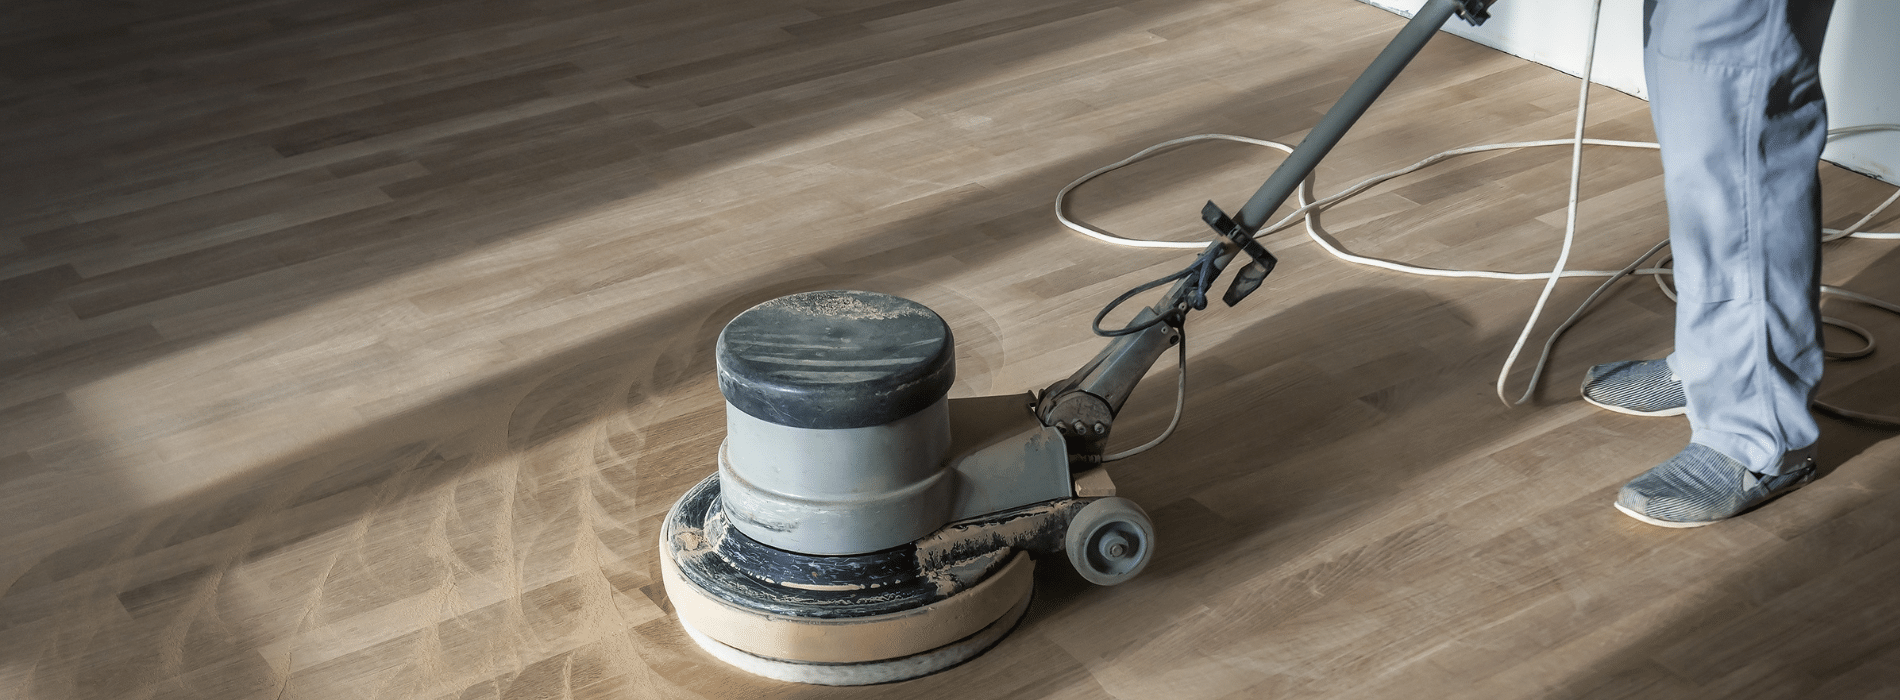 In Perivale, UB6, Professional herringbone floor sanding by Mr Sander® using the Effect 2200 sander (Voltage: 220V, Frequency: 60Hz, Size: 250x750 mm). Experience clean and efficient results with the HEPA-filtered dust extraction system.